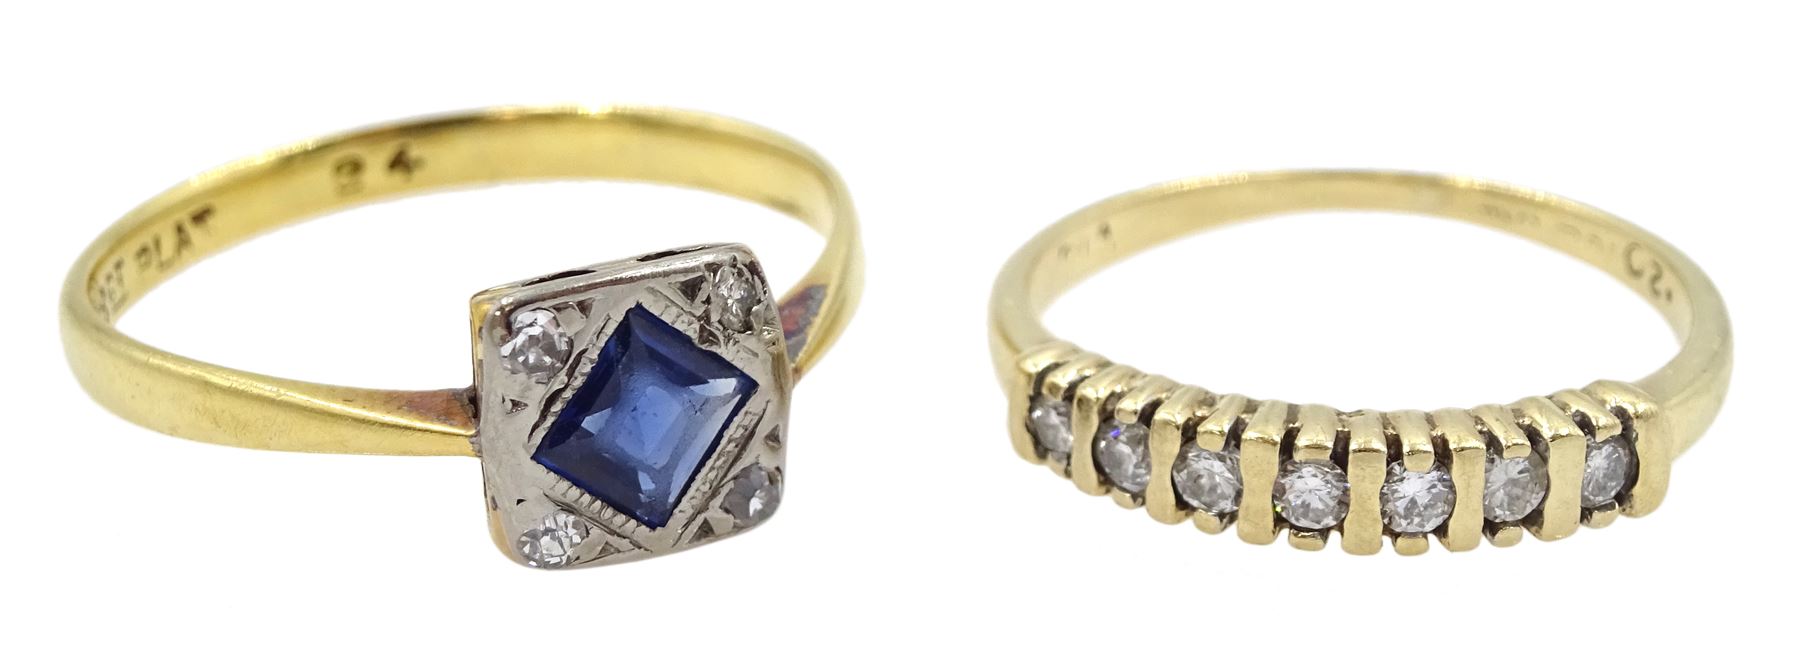 Art Deco gold and platinum diamond and synthetic sapphire ring stamped 18ct Plat and a 9ct gold seve